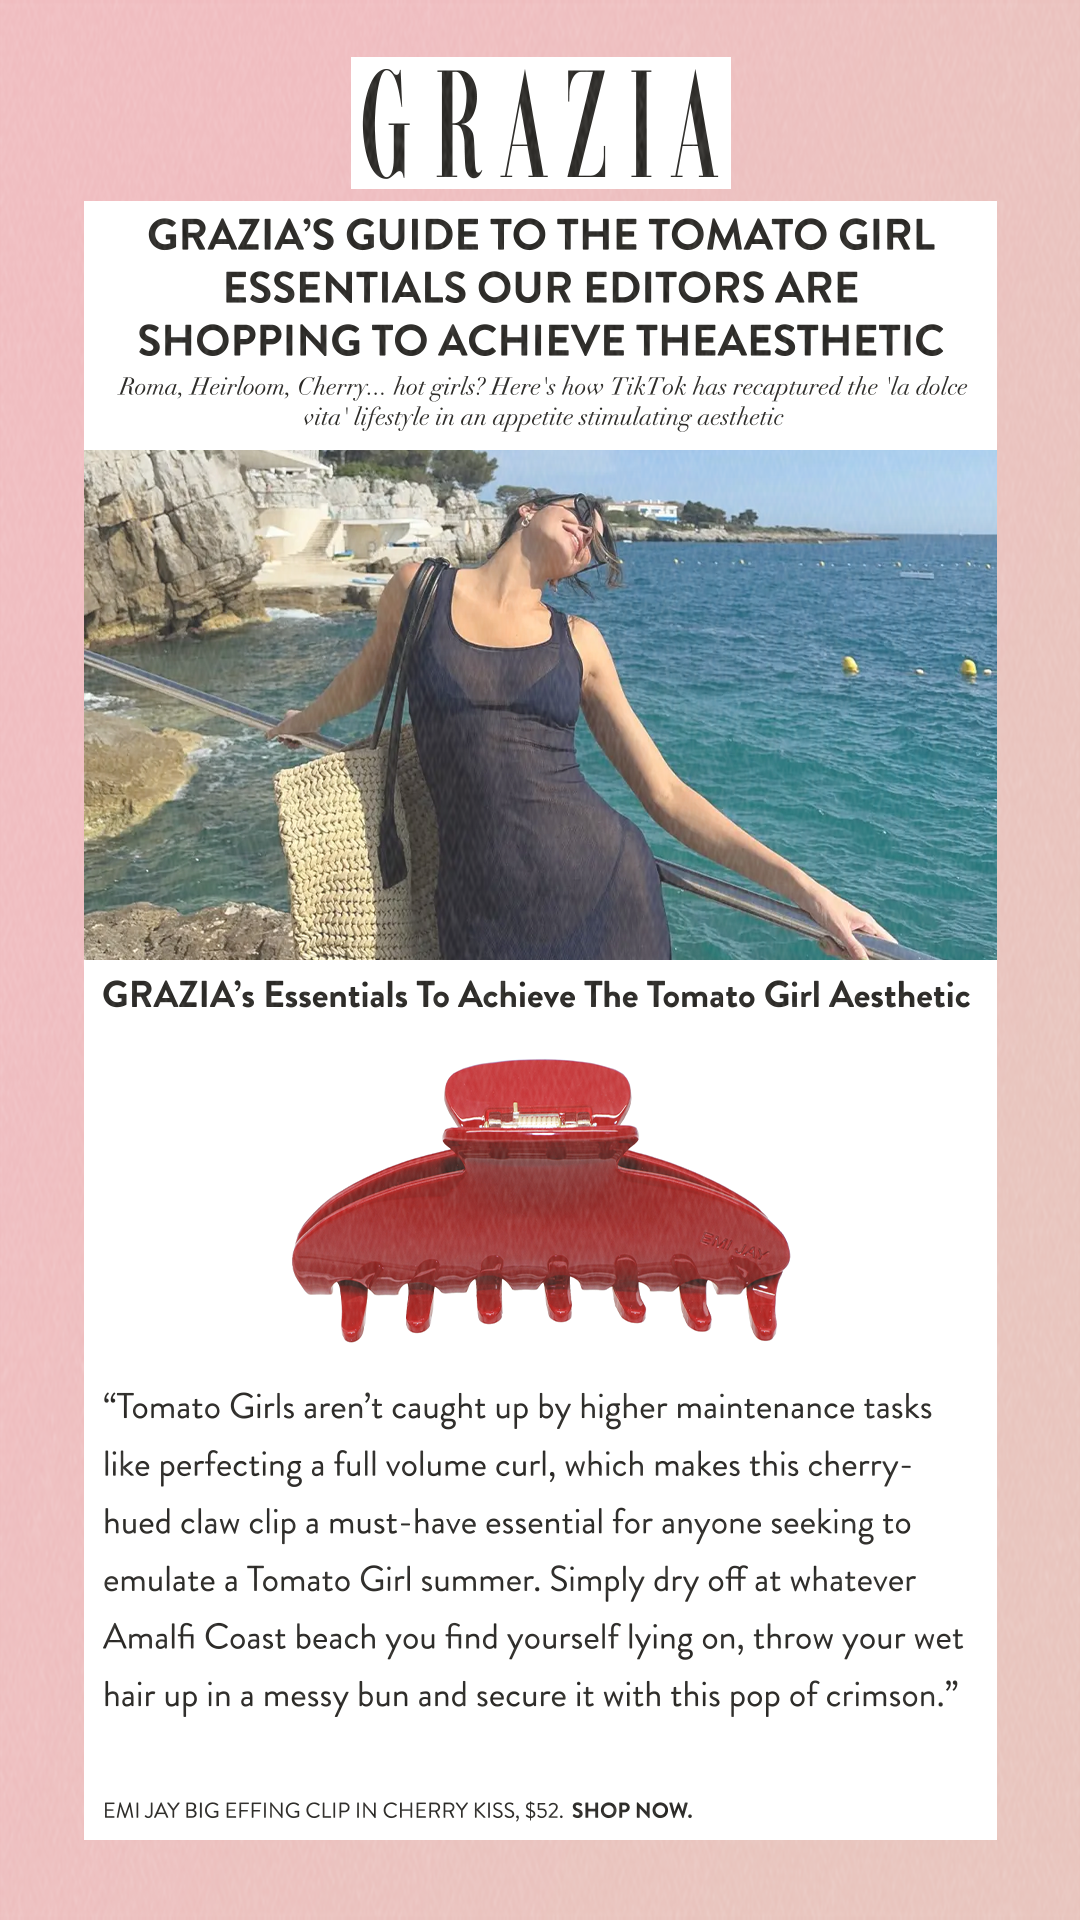 Grazia’s Guide To The Tomato Girl Essentials Our Editors Are Shopping To Achieve TheAestheticRoma, Heirloom, Cherry... hot girls? Here's how TikTok has recaptured the 'la dolce vita' lifestyle in an appetite stimulating aesthetic GRAZIA’s Essentials To Achieve The Tomato Girl Aesthetic Tomato Girls aren’t caught up by higher maintenance tasks like perfecting a full volume curl, which makes this cherry-hued claw clip a must-have essential for anyone seeking to emulate a Tomato Girl summer. Simply dry off at whatever Amalfi Coast beach you find yourself lying on, throw your wet hair up in a messy bun and secure it with this pop of crimson. Emi Jay BIG EFFING CLIP IN CHERRY KISS, $52. SHOP NOW.